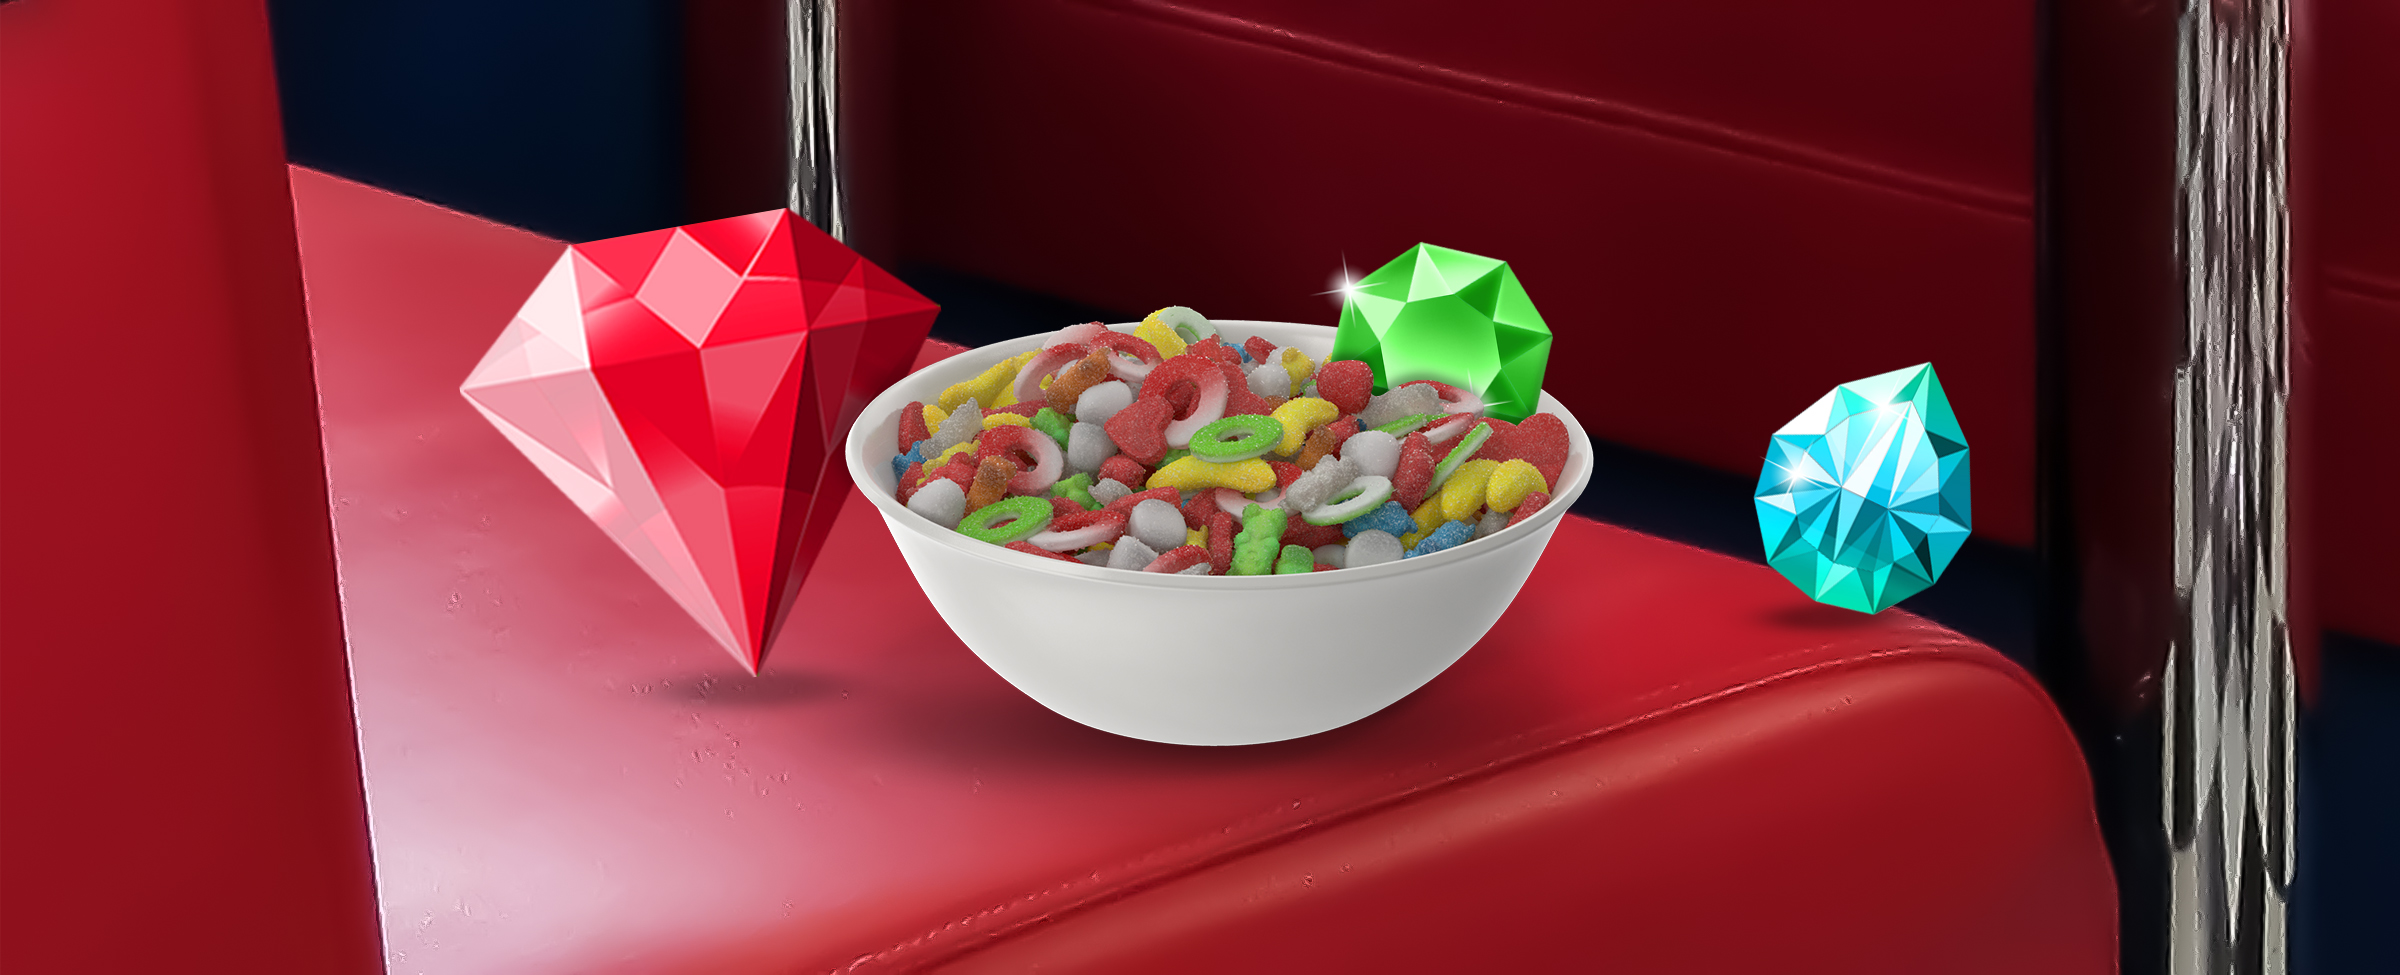 Sitting on top of a red diner booth seat is a white bowl of colorful cereal with a green gem sticking out of it. To the right is a large diamond, and to the left, a red diamond.